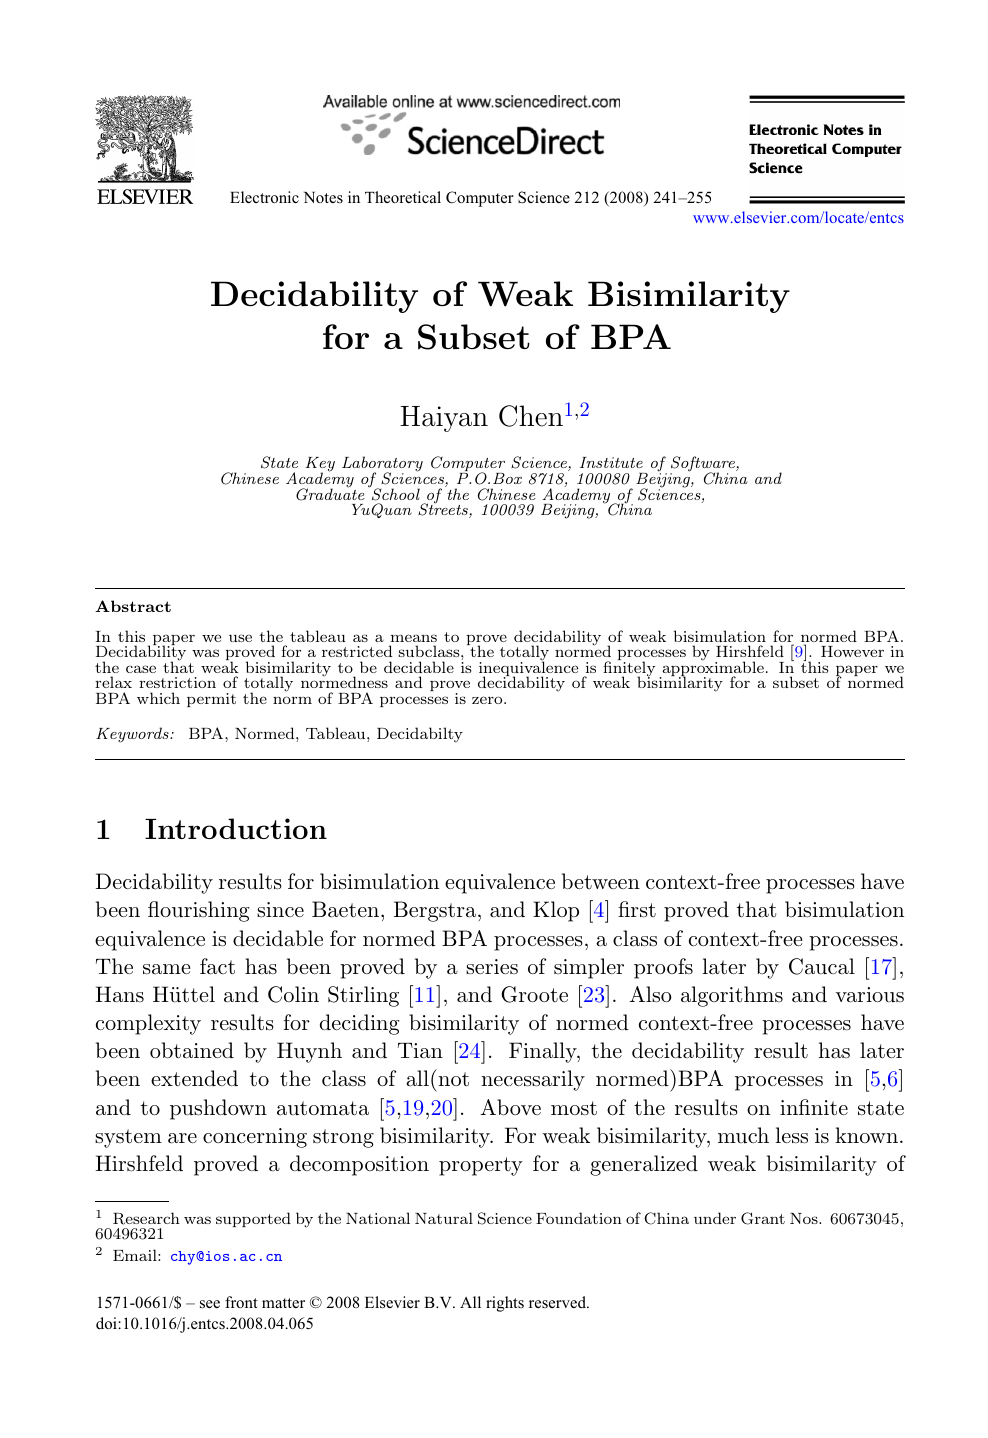 Decidability Of Weak Bisimilarity For A Subset Of Bpa Topic Of Research Paper In Computer And Information Sciences Download Scholarly Article Pdf And Read For Free On Cyberleninka Open Science Hub